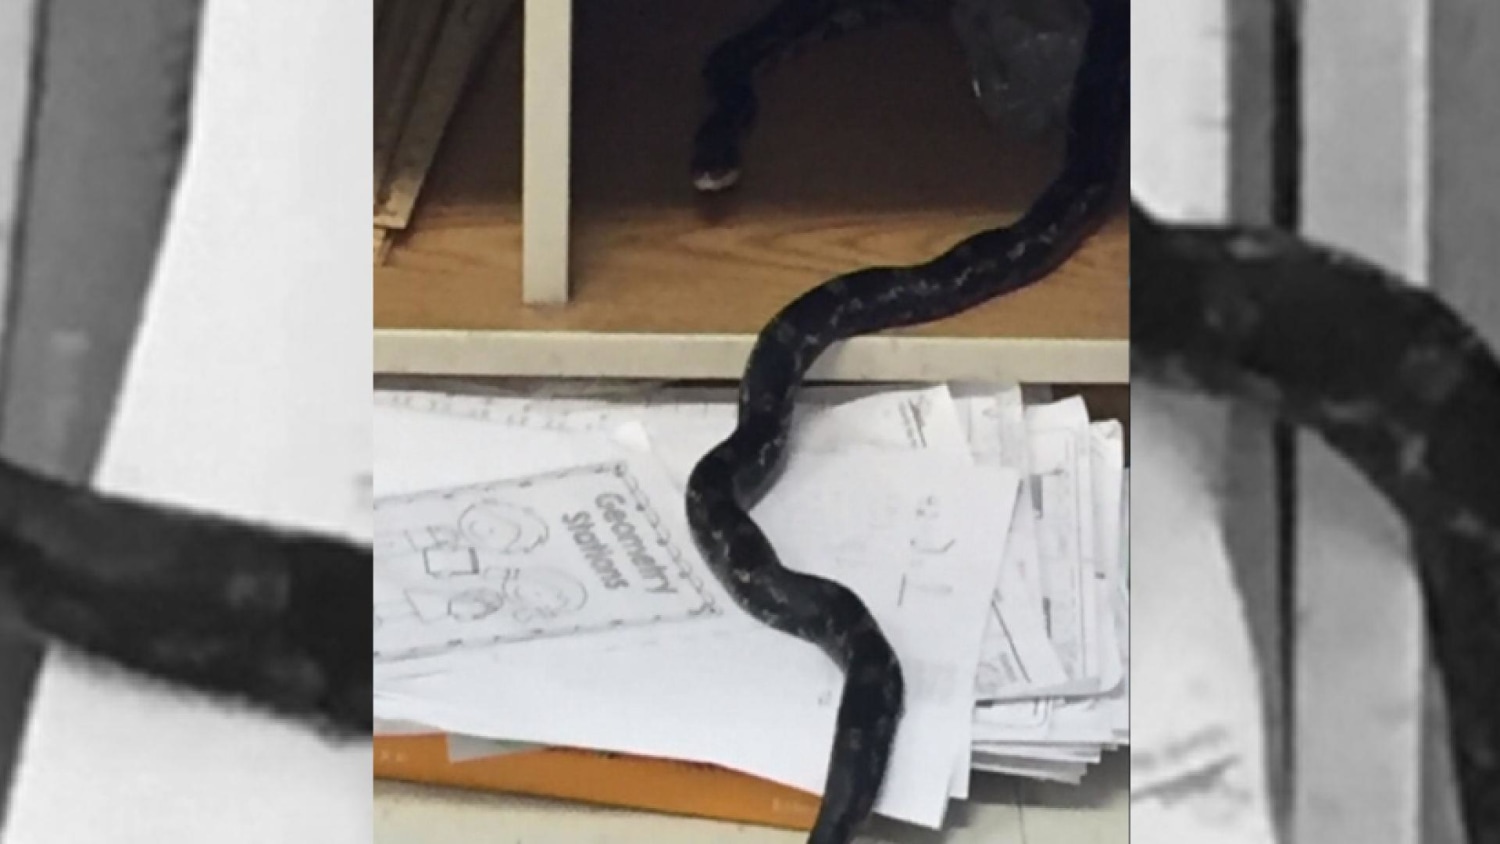 Terrifying moment huge black snake slithers its way up through toilet